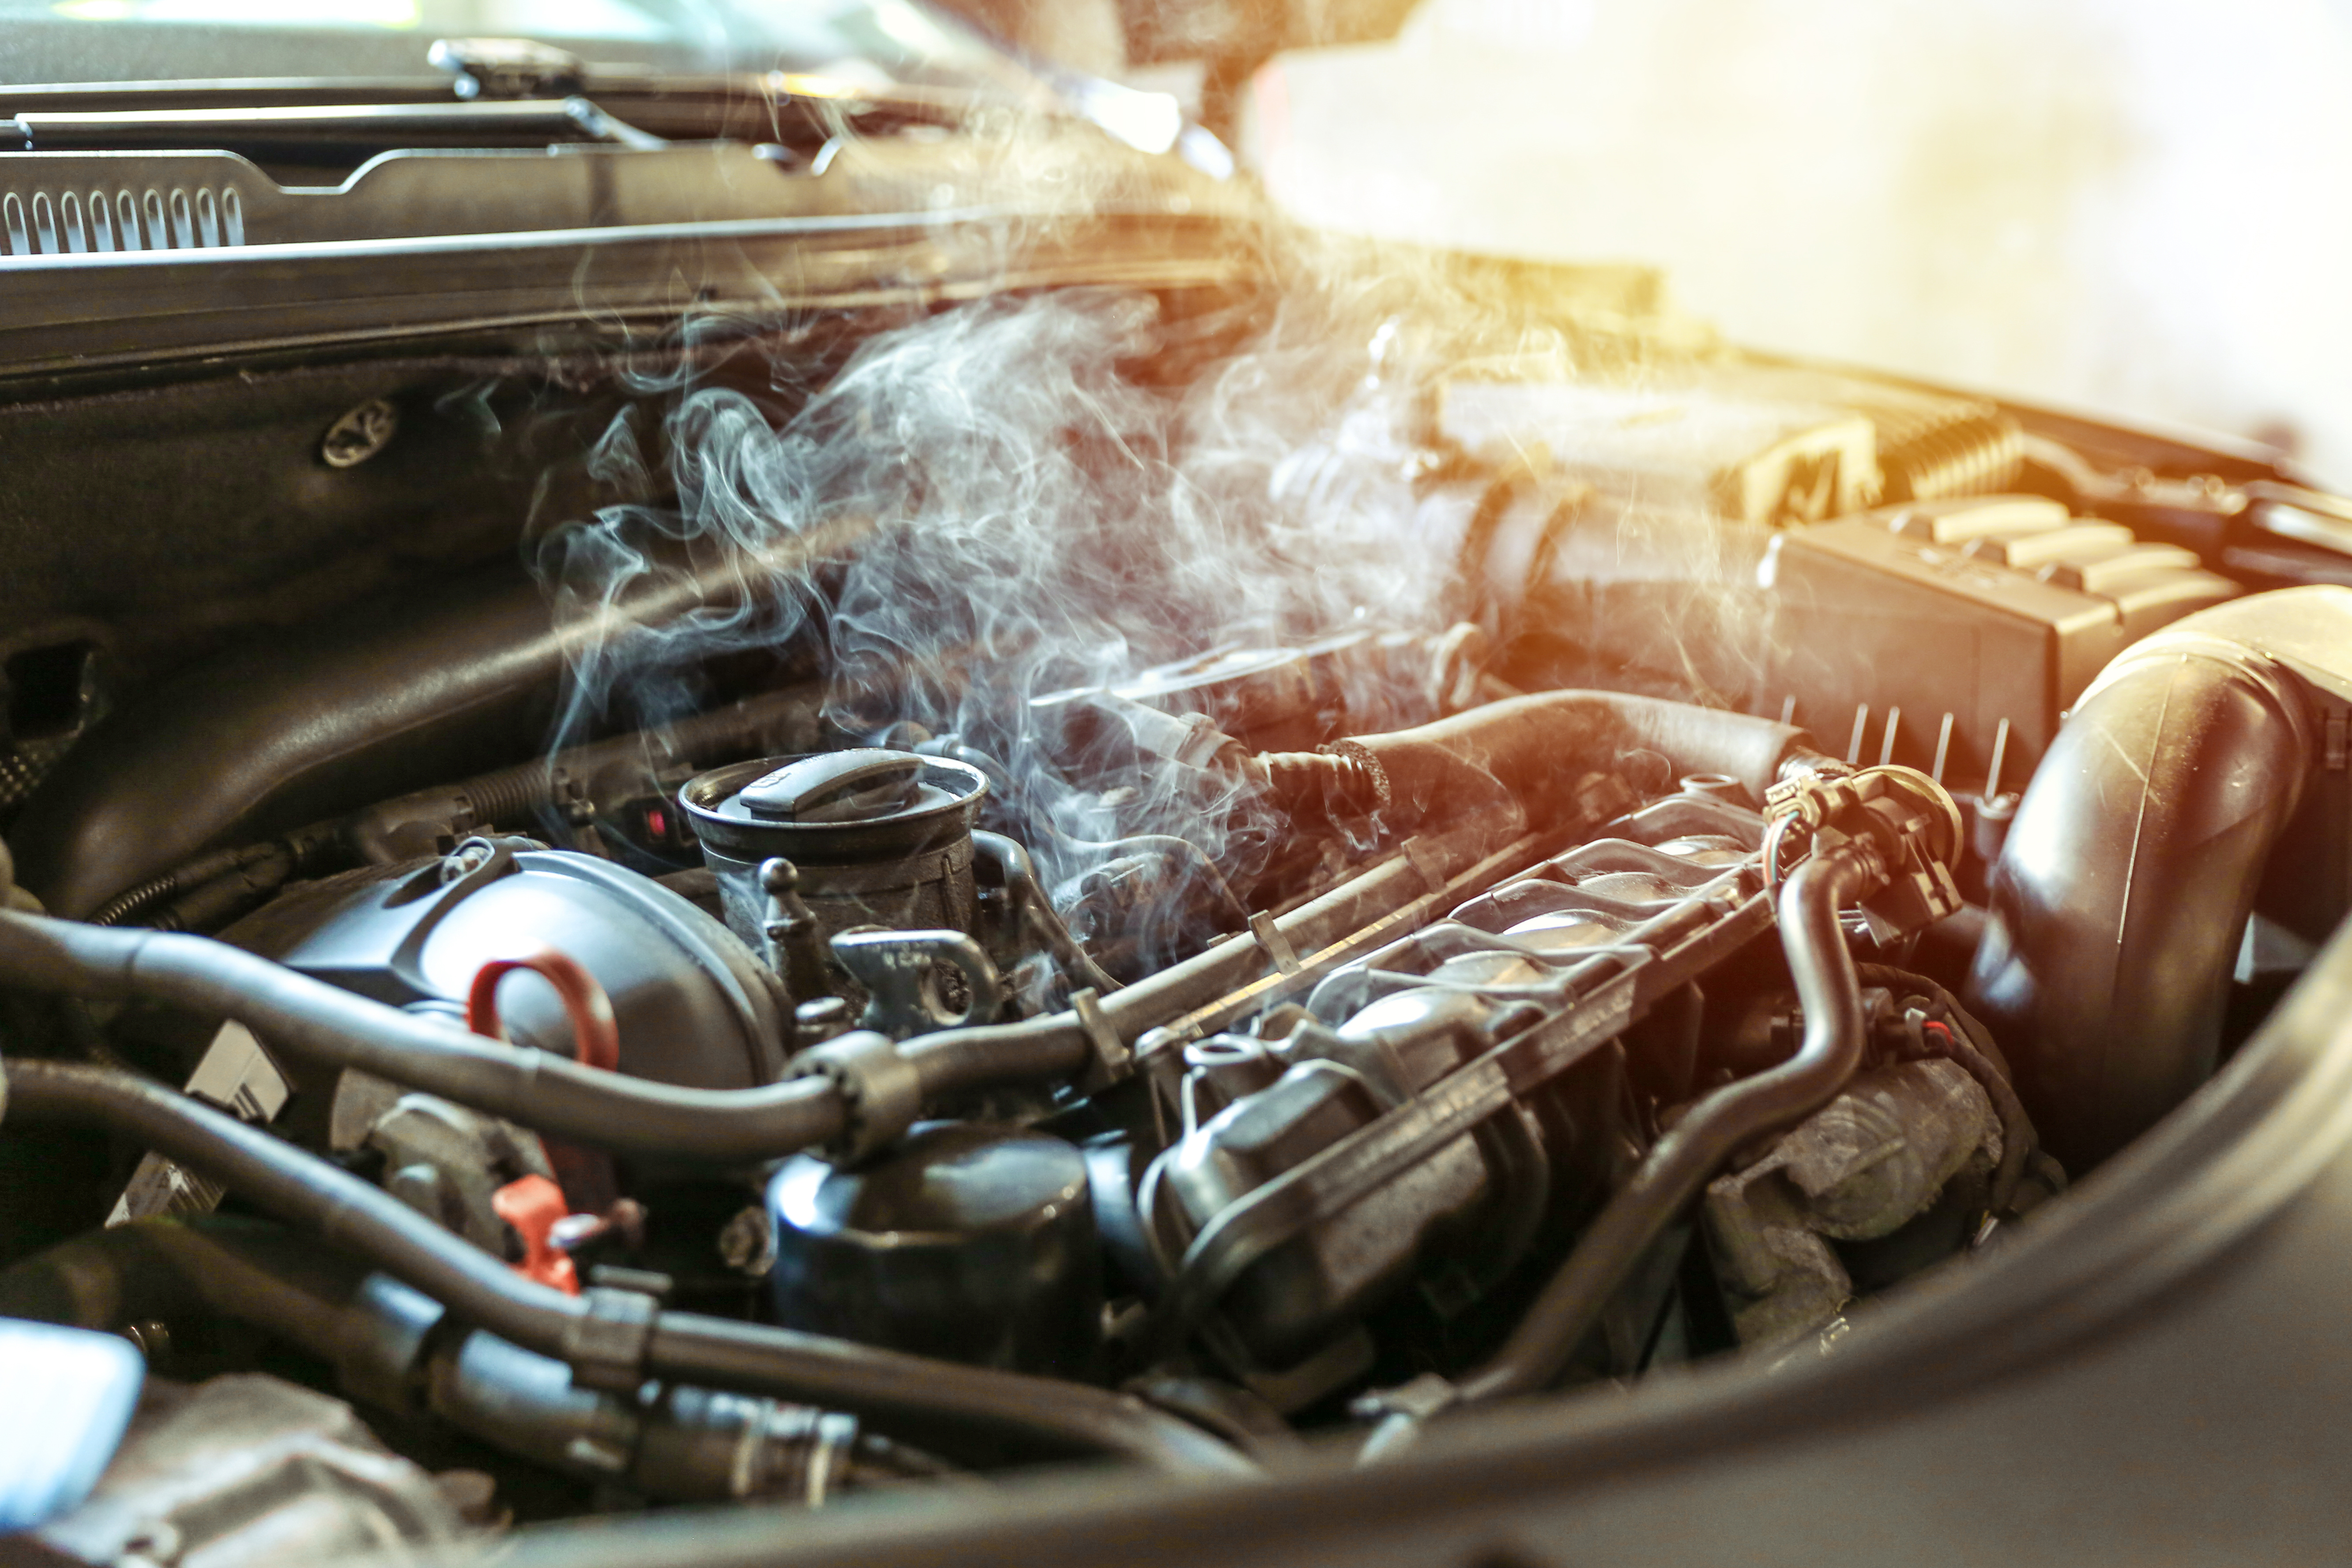 What Should I Do When My Engine Starts to Overheat and Fail?